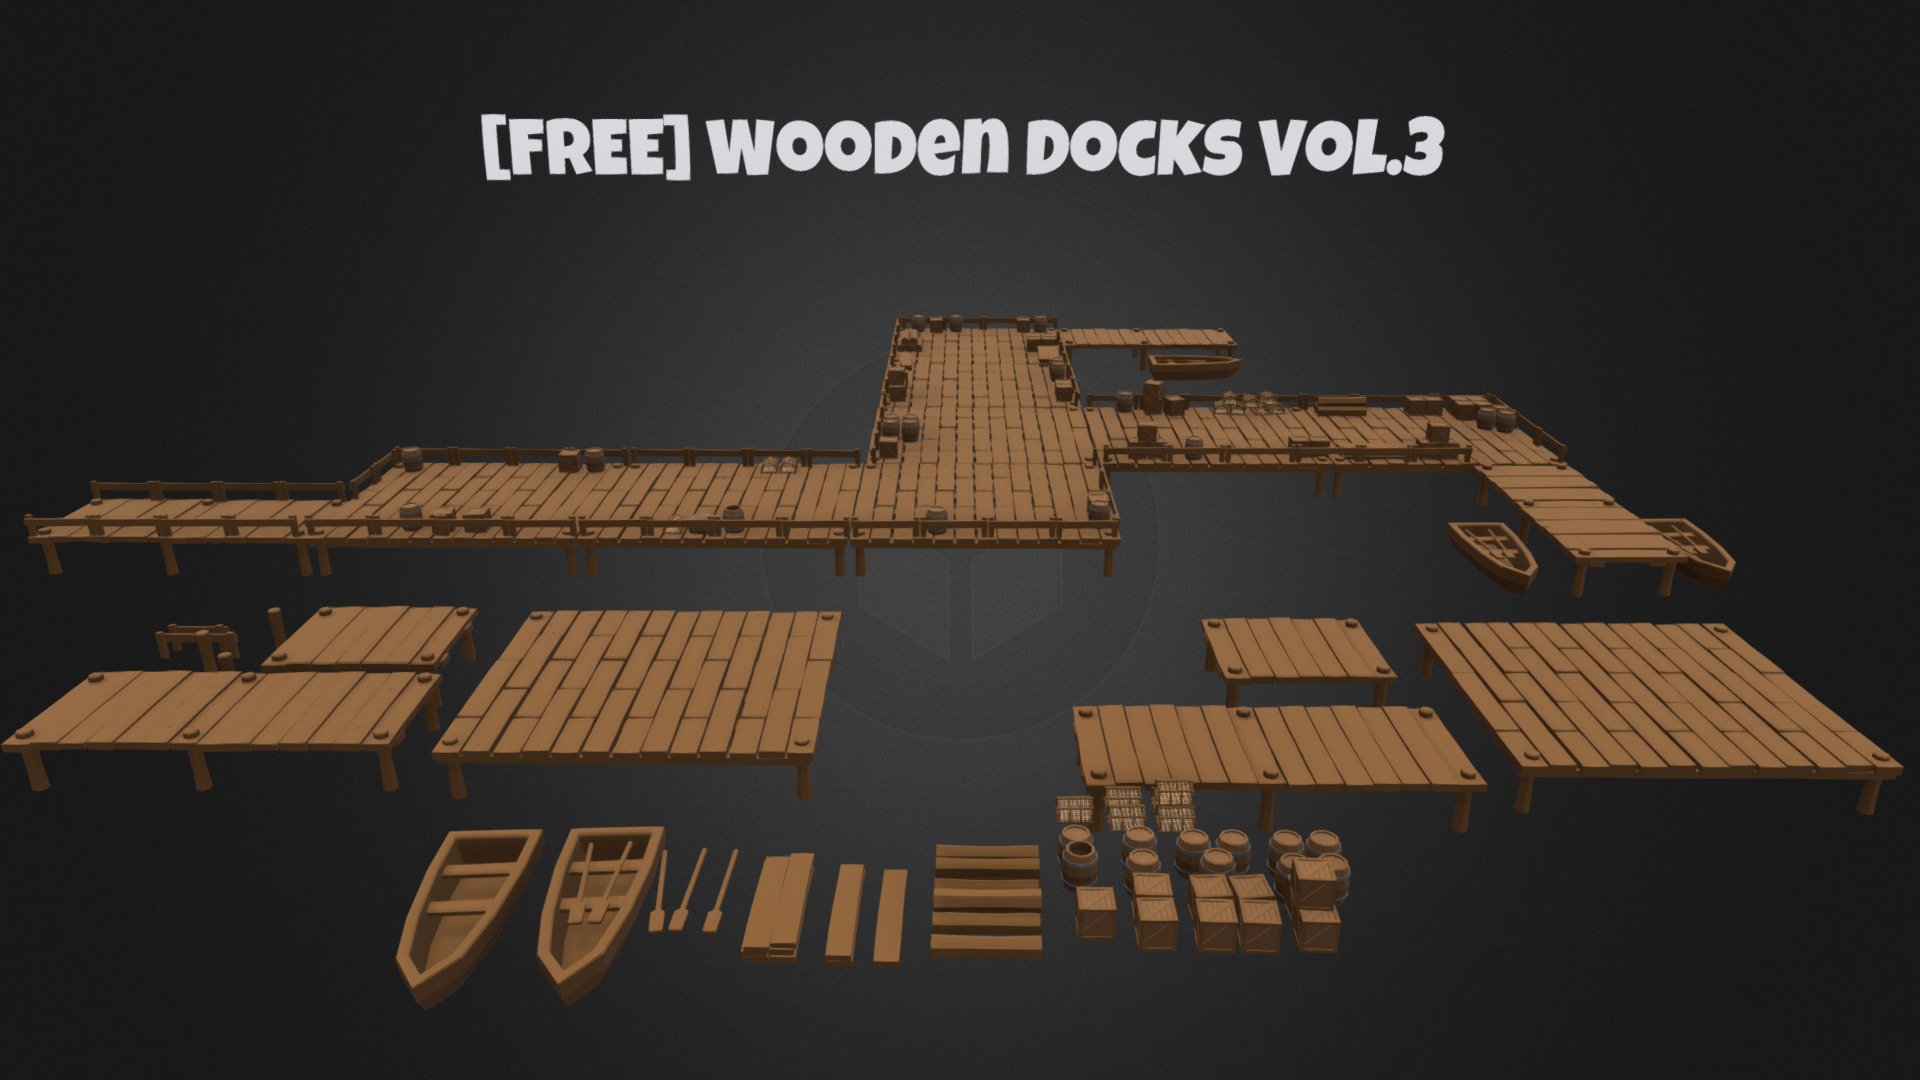 This is a Modular Lowpoly Docks pack [Version3]

Create your own dock with this FREE Asset Pack
this version is more simplified than the rest very blocky design 
hope you enjoy!

[Contents]

Barrels
Crates
Planks
Logs
Fences
Docks 
Docks With Nails

[My Youtube Channel]

https://www.youtube.com/channel/UCAY0ZHJ-9QxYxokO-13ImHw

SimplePolygon Discord https://discord.gg/8WSpWnGH4b

Original Models / Lowpoly Models / Game ready Props

[Licence] Not to resell model, can sell commercially in end project/game

Credit myself, SimplePolygon

If you have any further questions I will be happy to answer 3d model